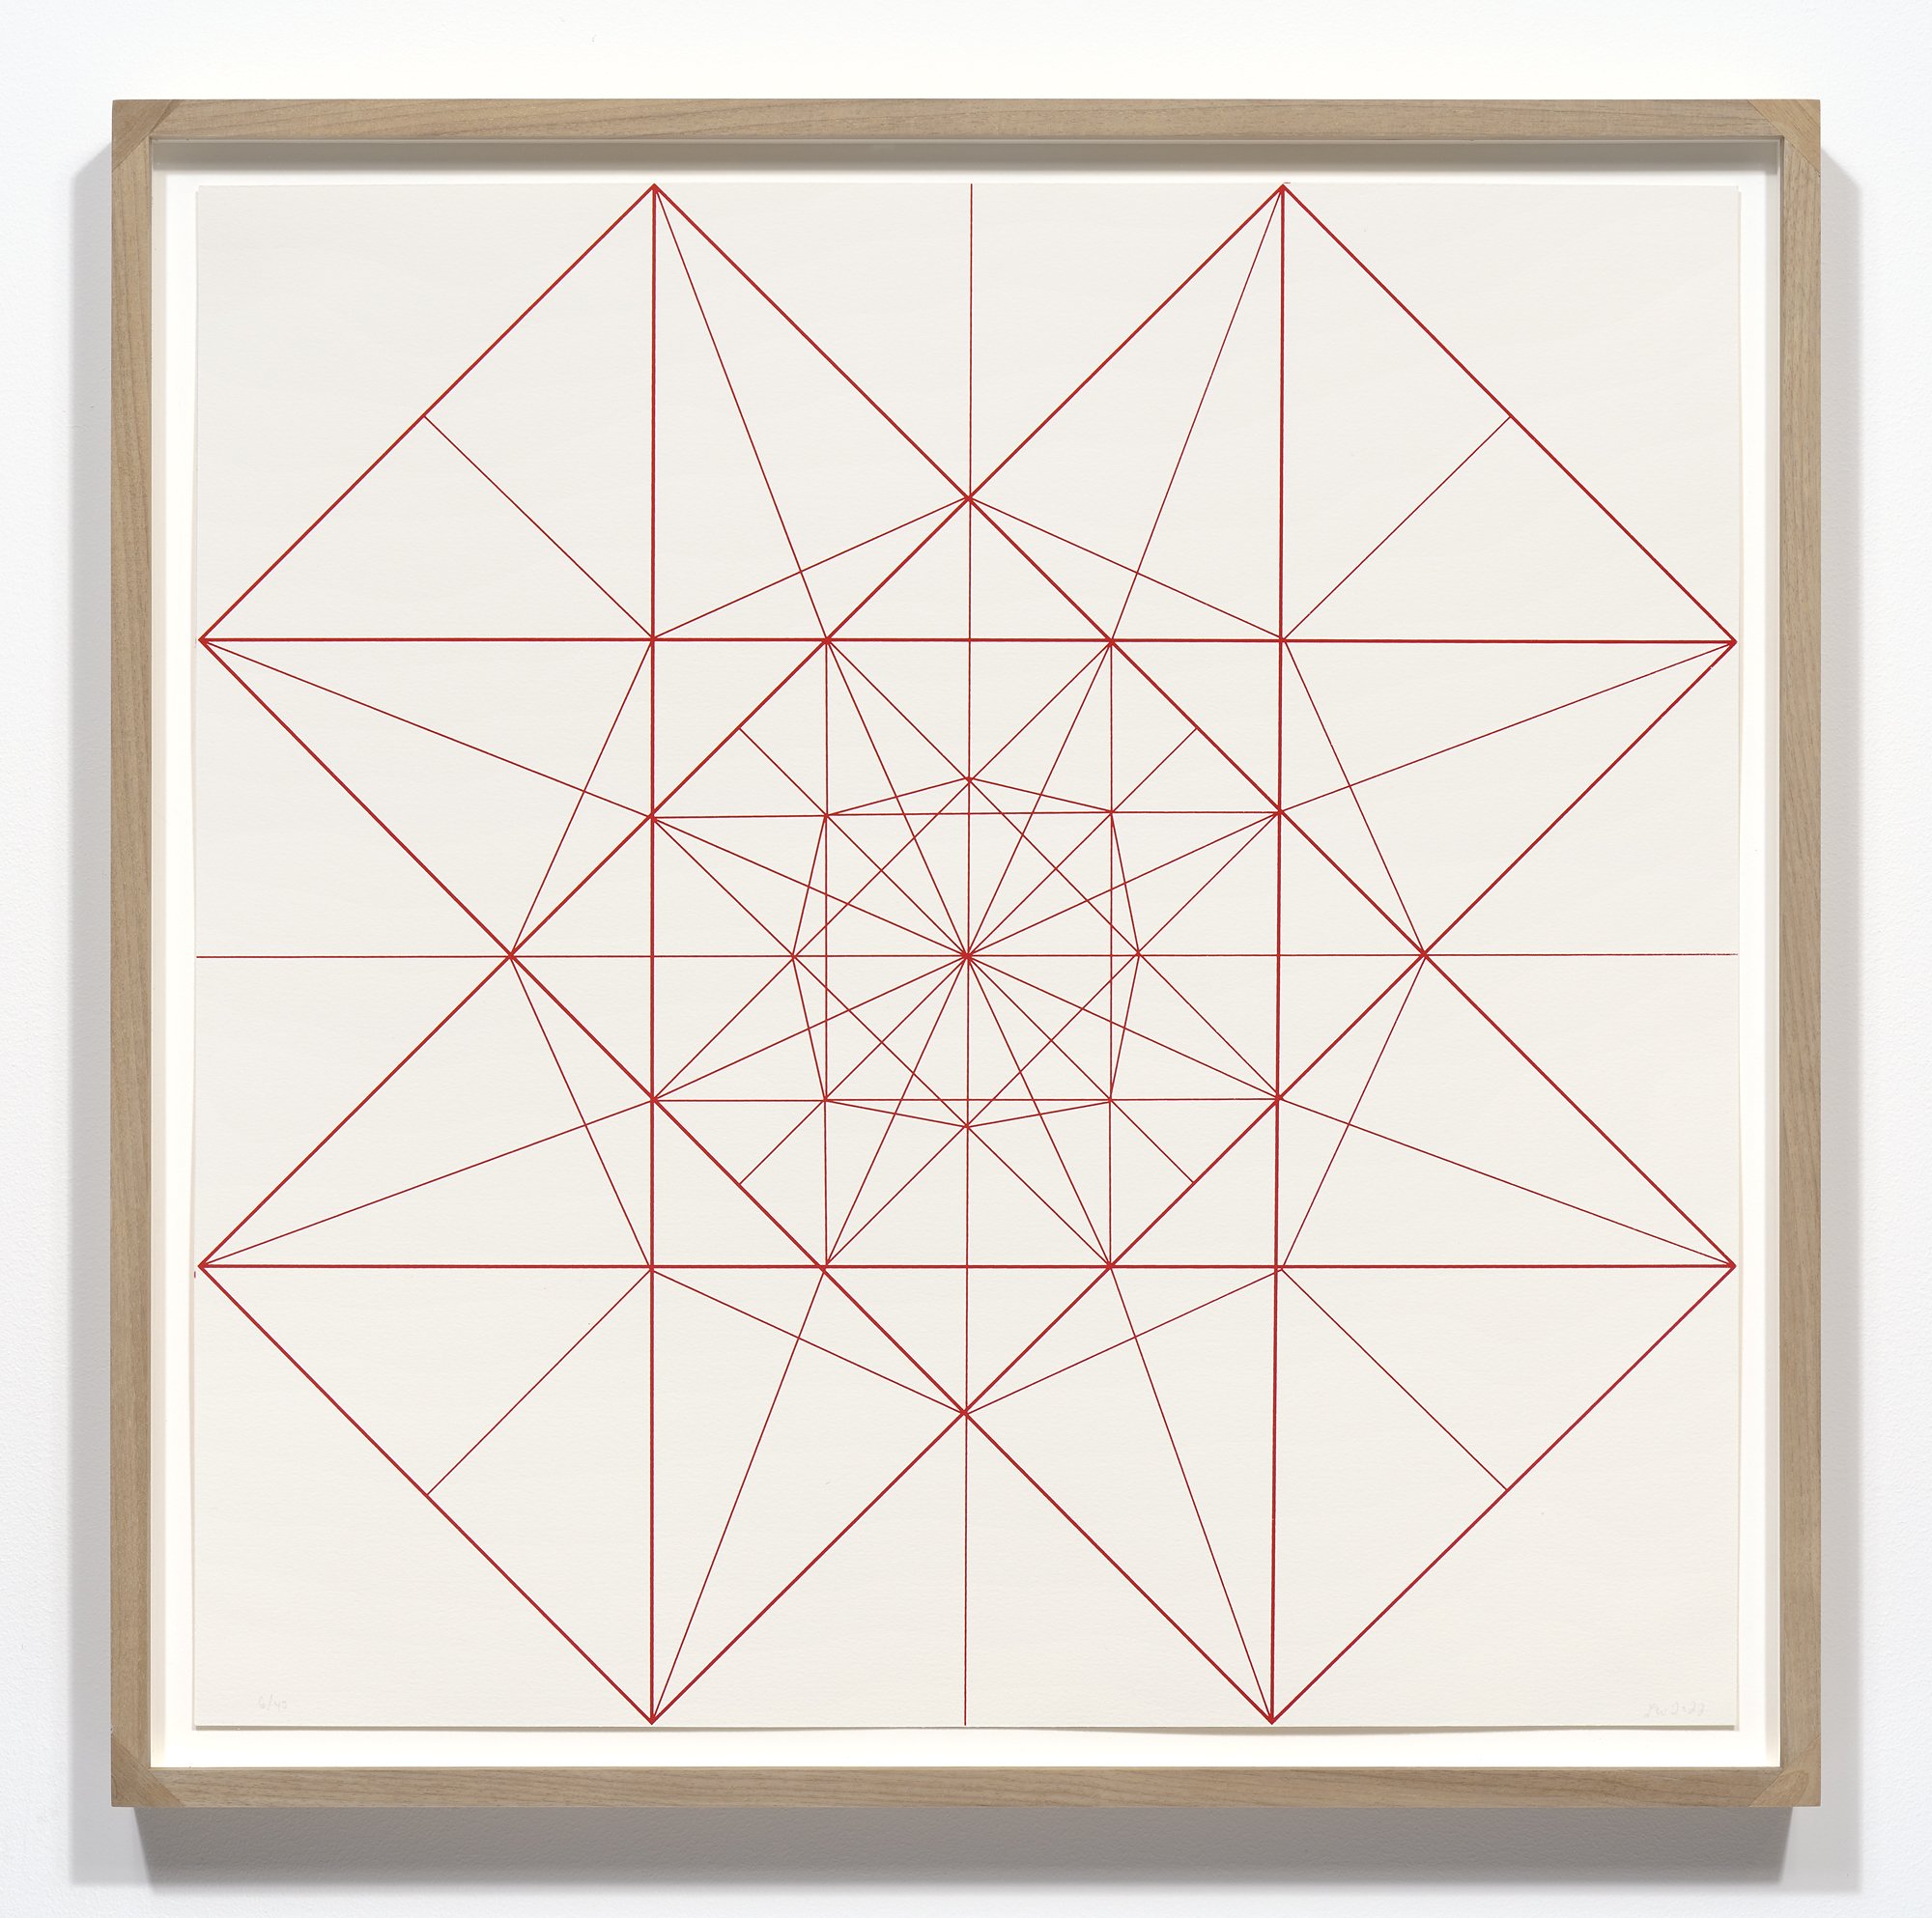  Lena Wolff,  Radiant Star #2 , 2022 Screenprint | Paper: 20 x 20 inches; Frame: 21 x 21 inches | Edition 1 of 20 | HG16240 